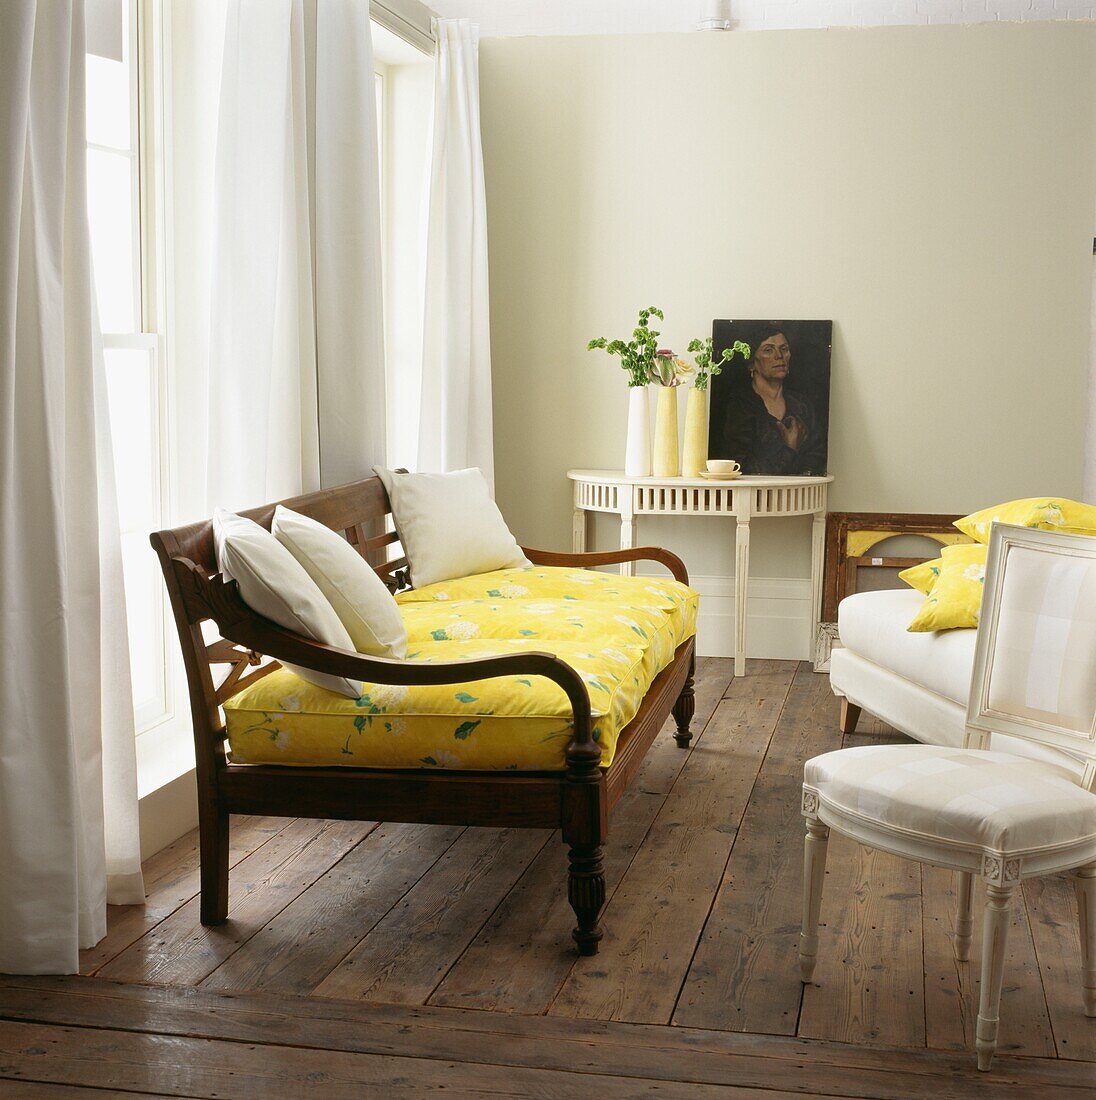 Yellow upholstered daybed at windows of room with exposed floorboards and portrait on console table